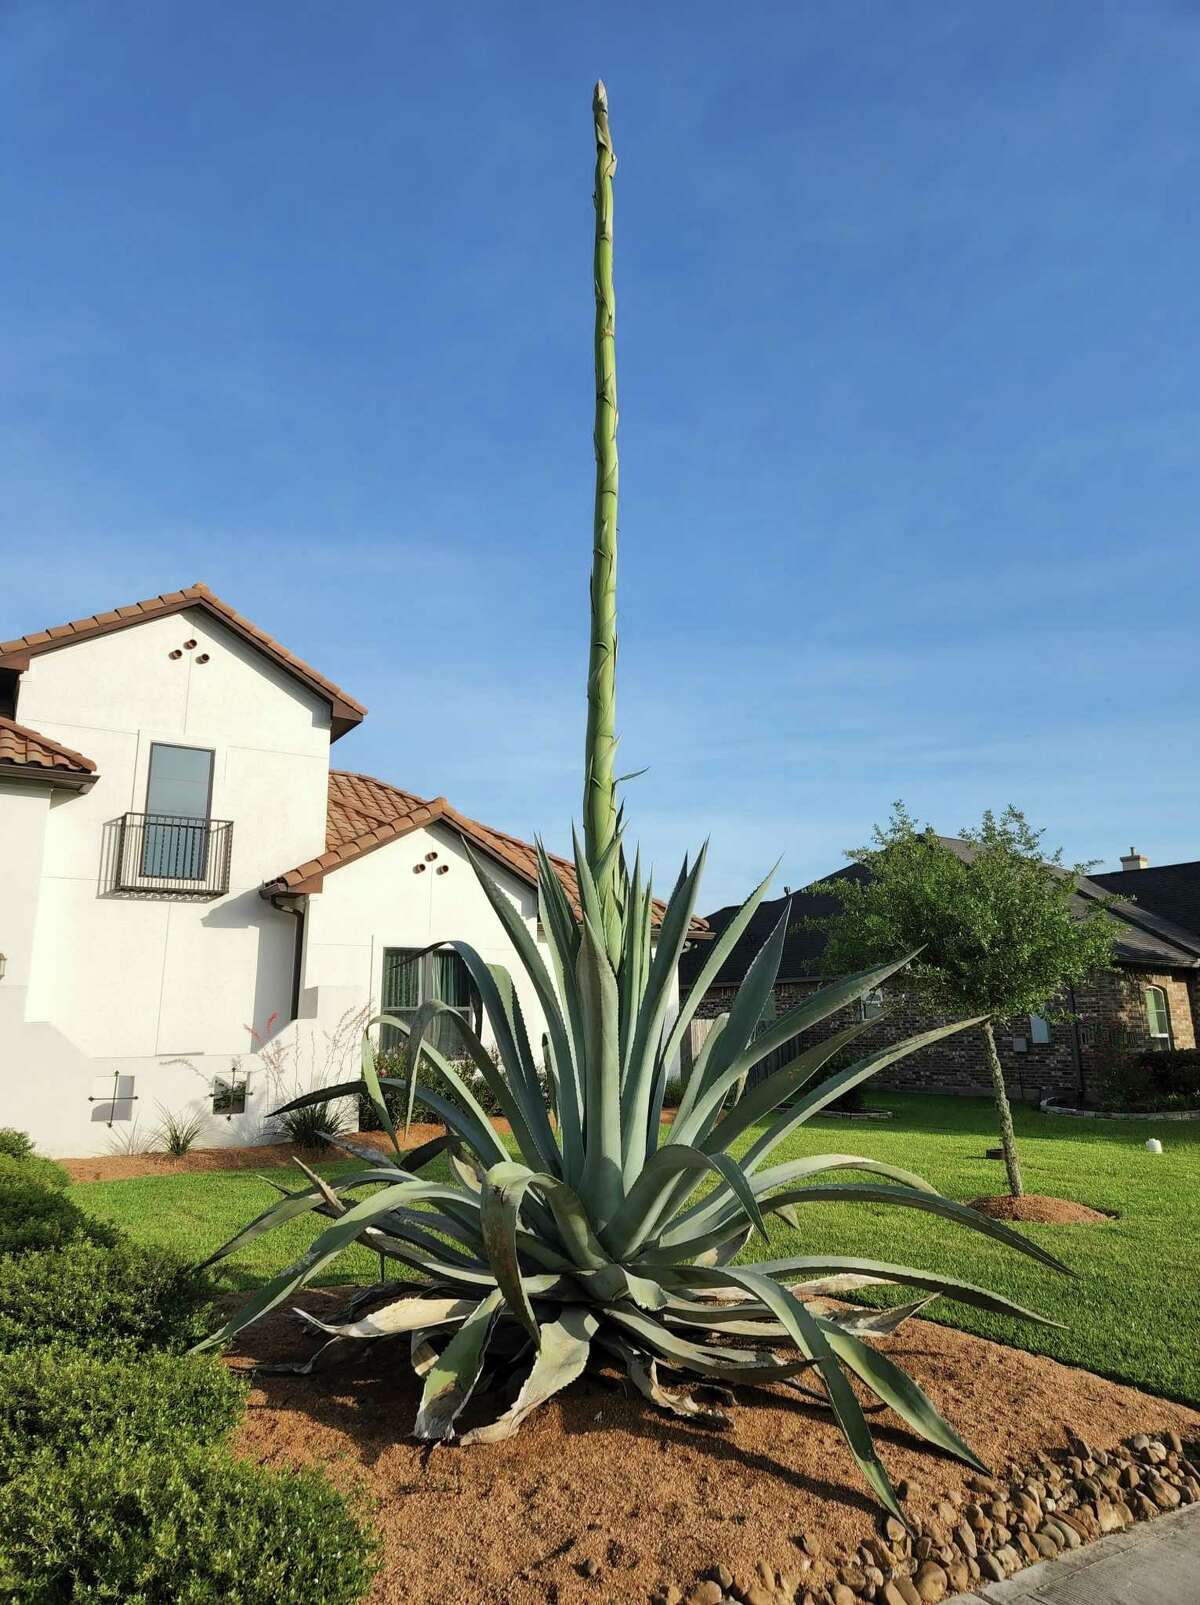 This is one of two agave americana plants outside the League City home of Eduardo and Laura Lopez. Though the plants can live to up to 30 years, Eduardo said that these plants are 9 years old.